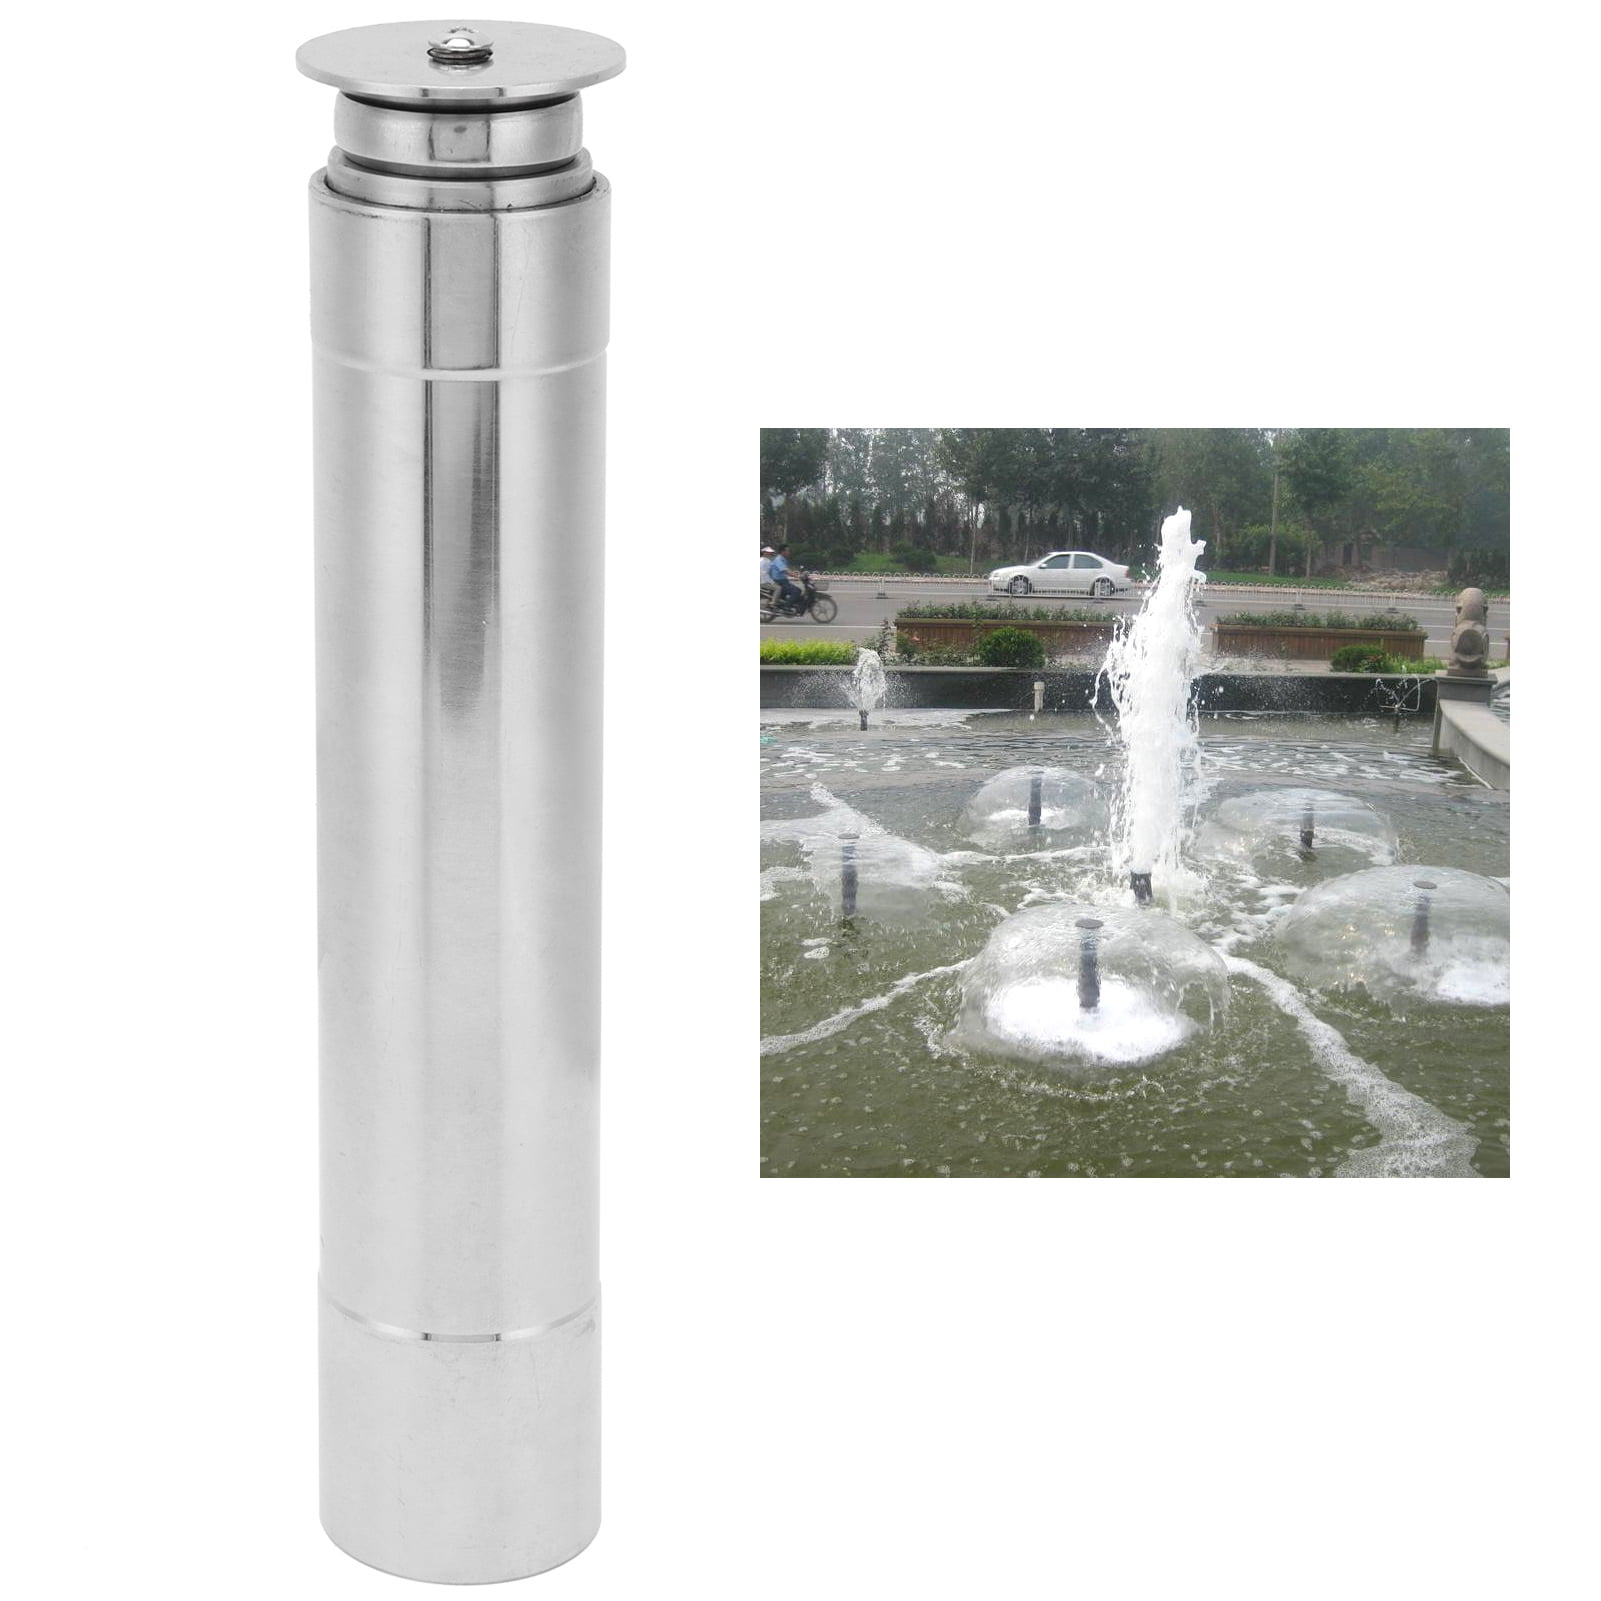 Less Noise and Splashing Water Bell Patterns Fountain Nozzle G1 DN25 Female Thread Fountain Heads Nozzle Stainless Steel Telescopic Pond Sprinkler 